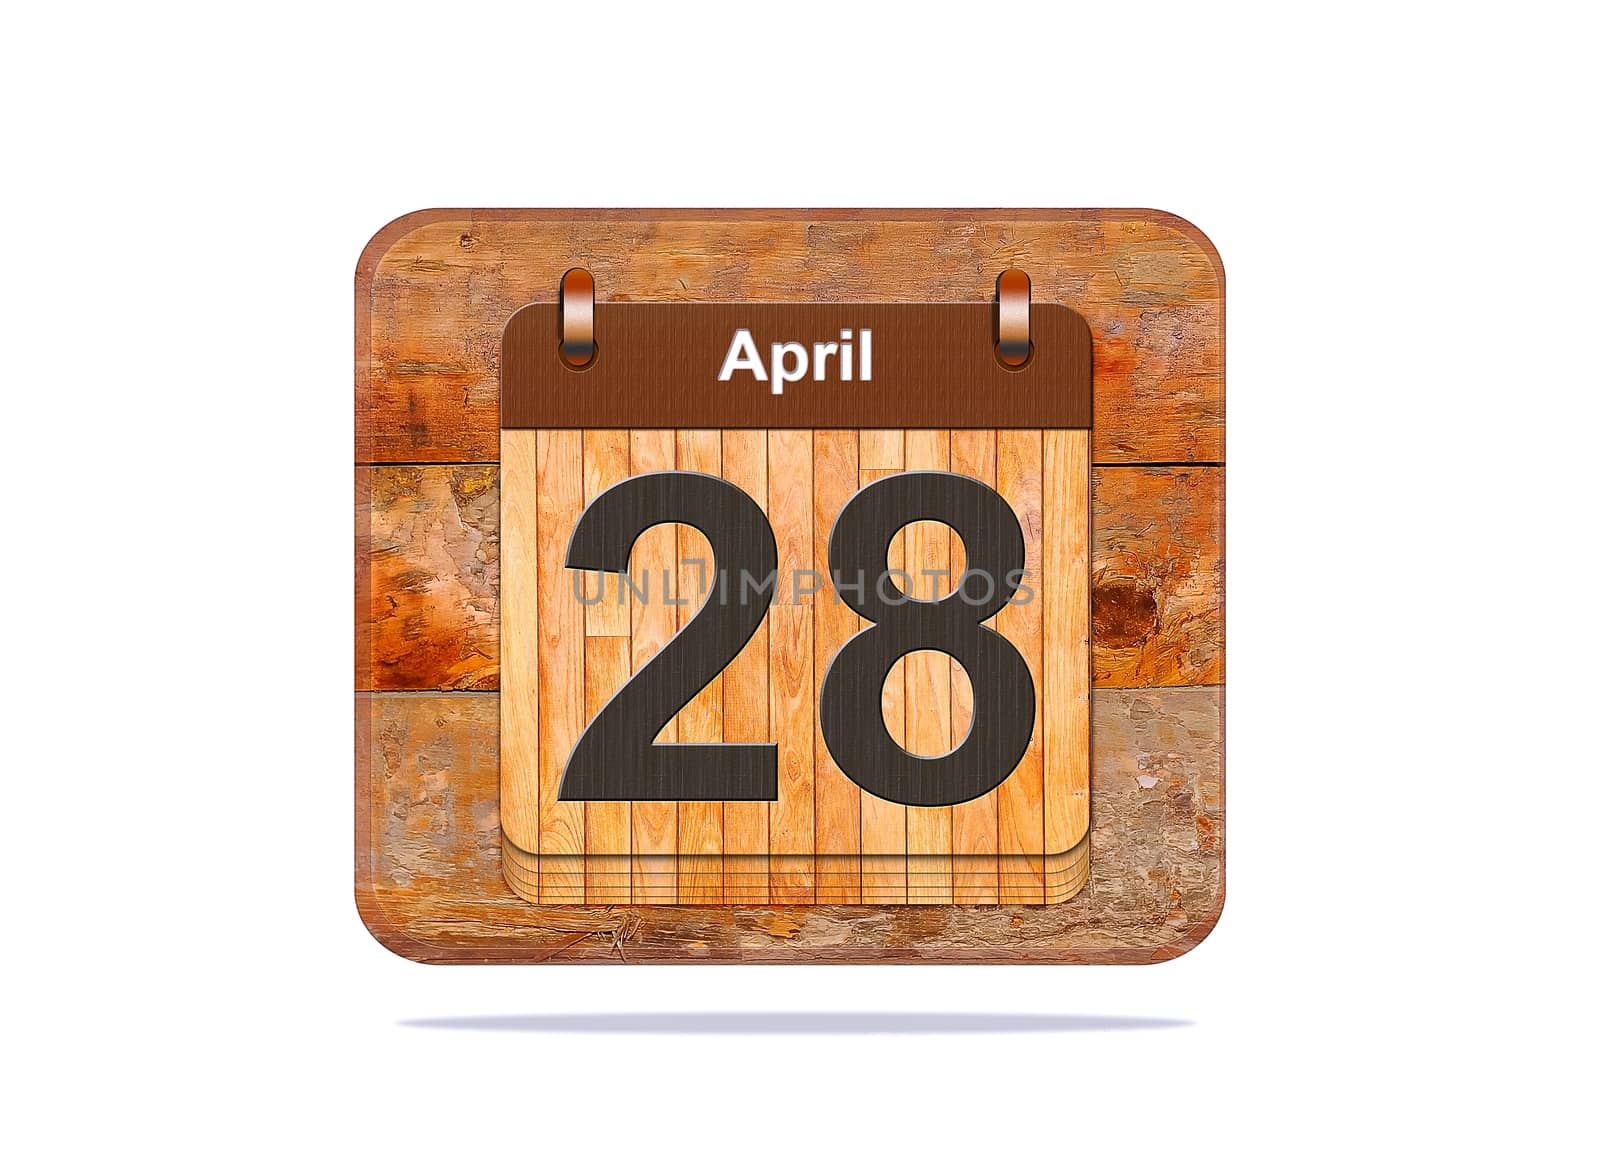 Calendar with the date of April 28.